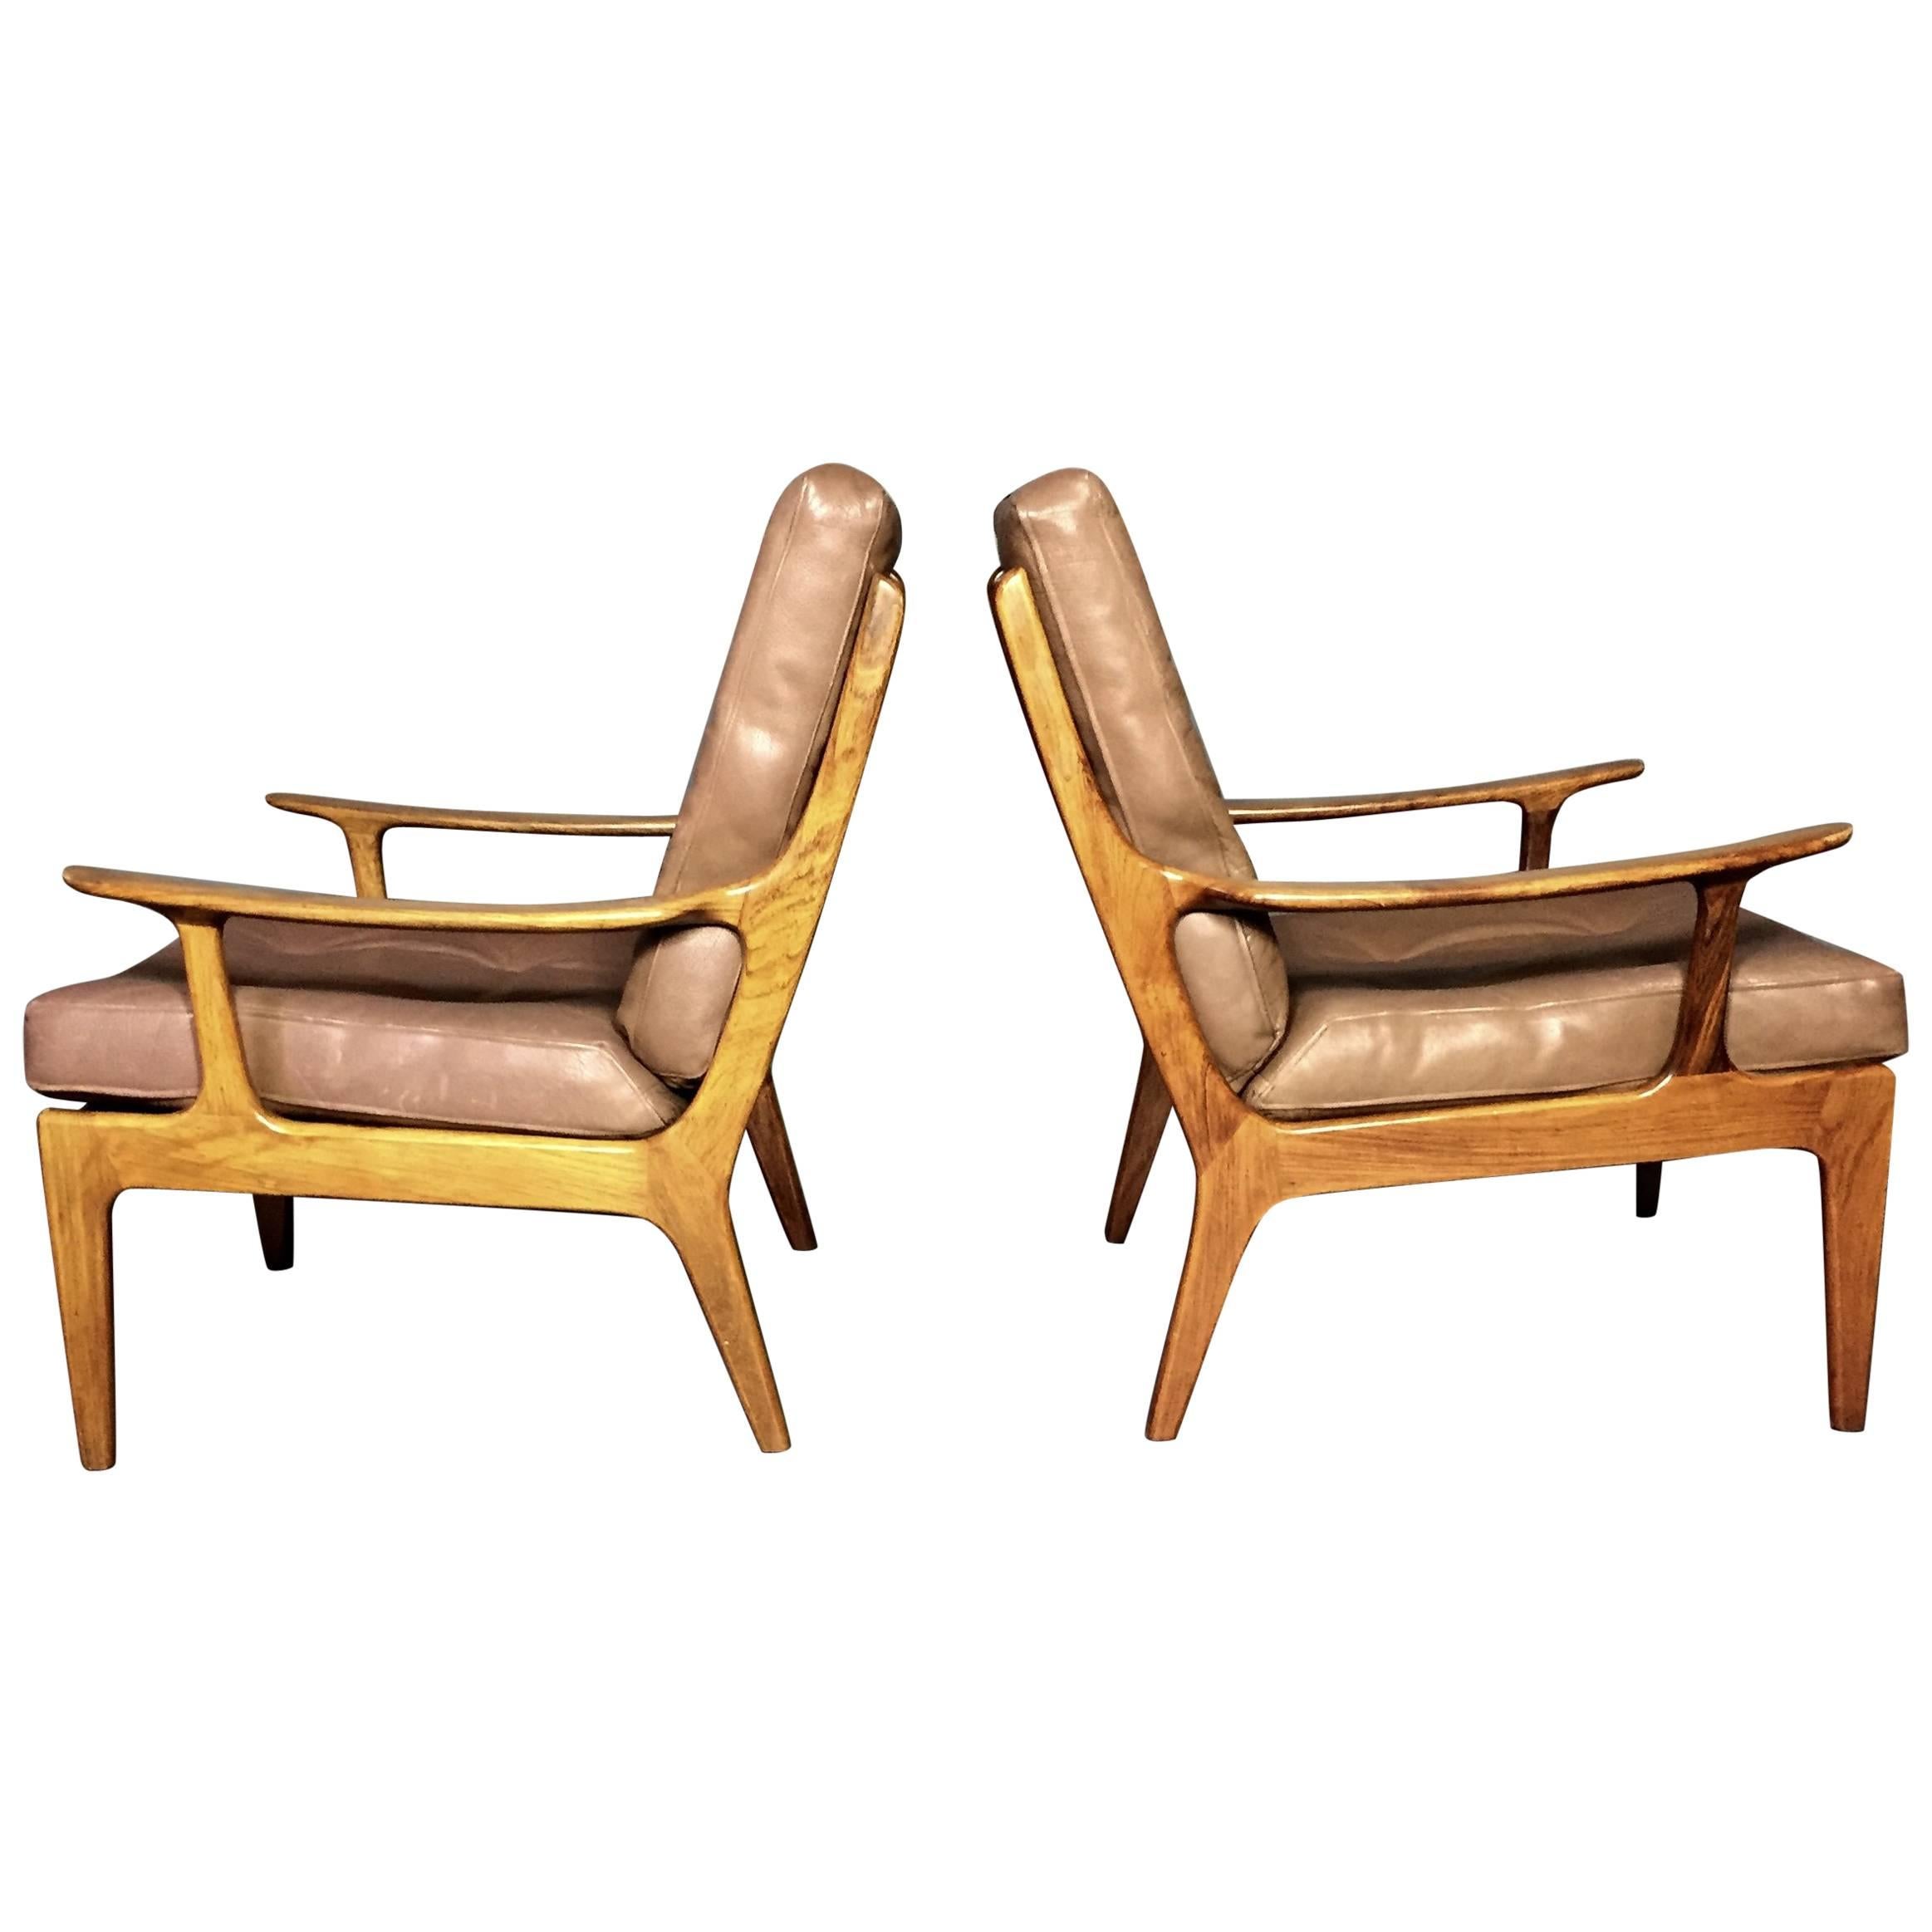 Solid Rosewood and Leather Lounge Chairs, Denmark, circa 1970